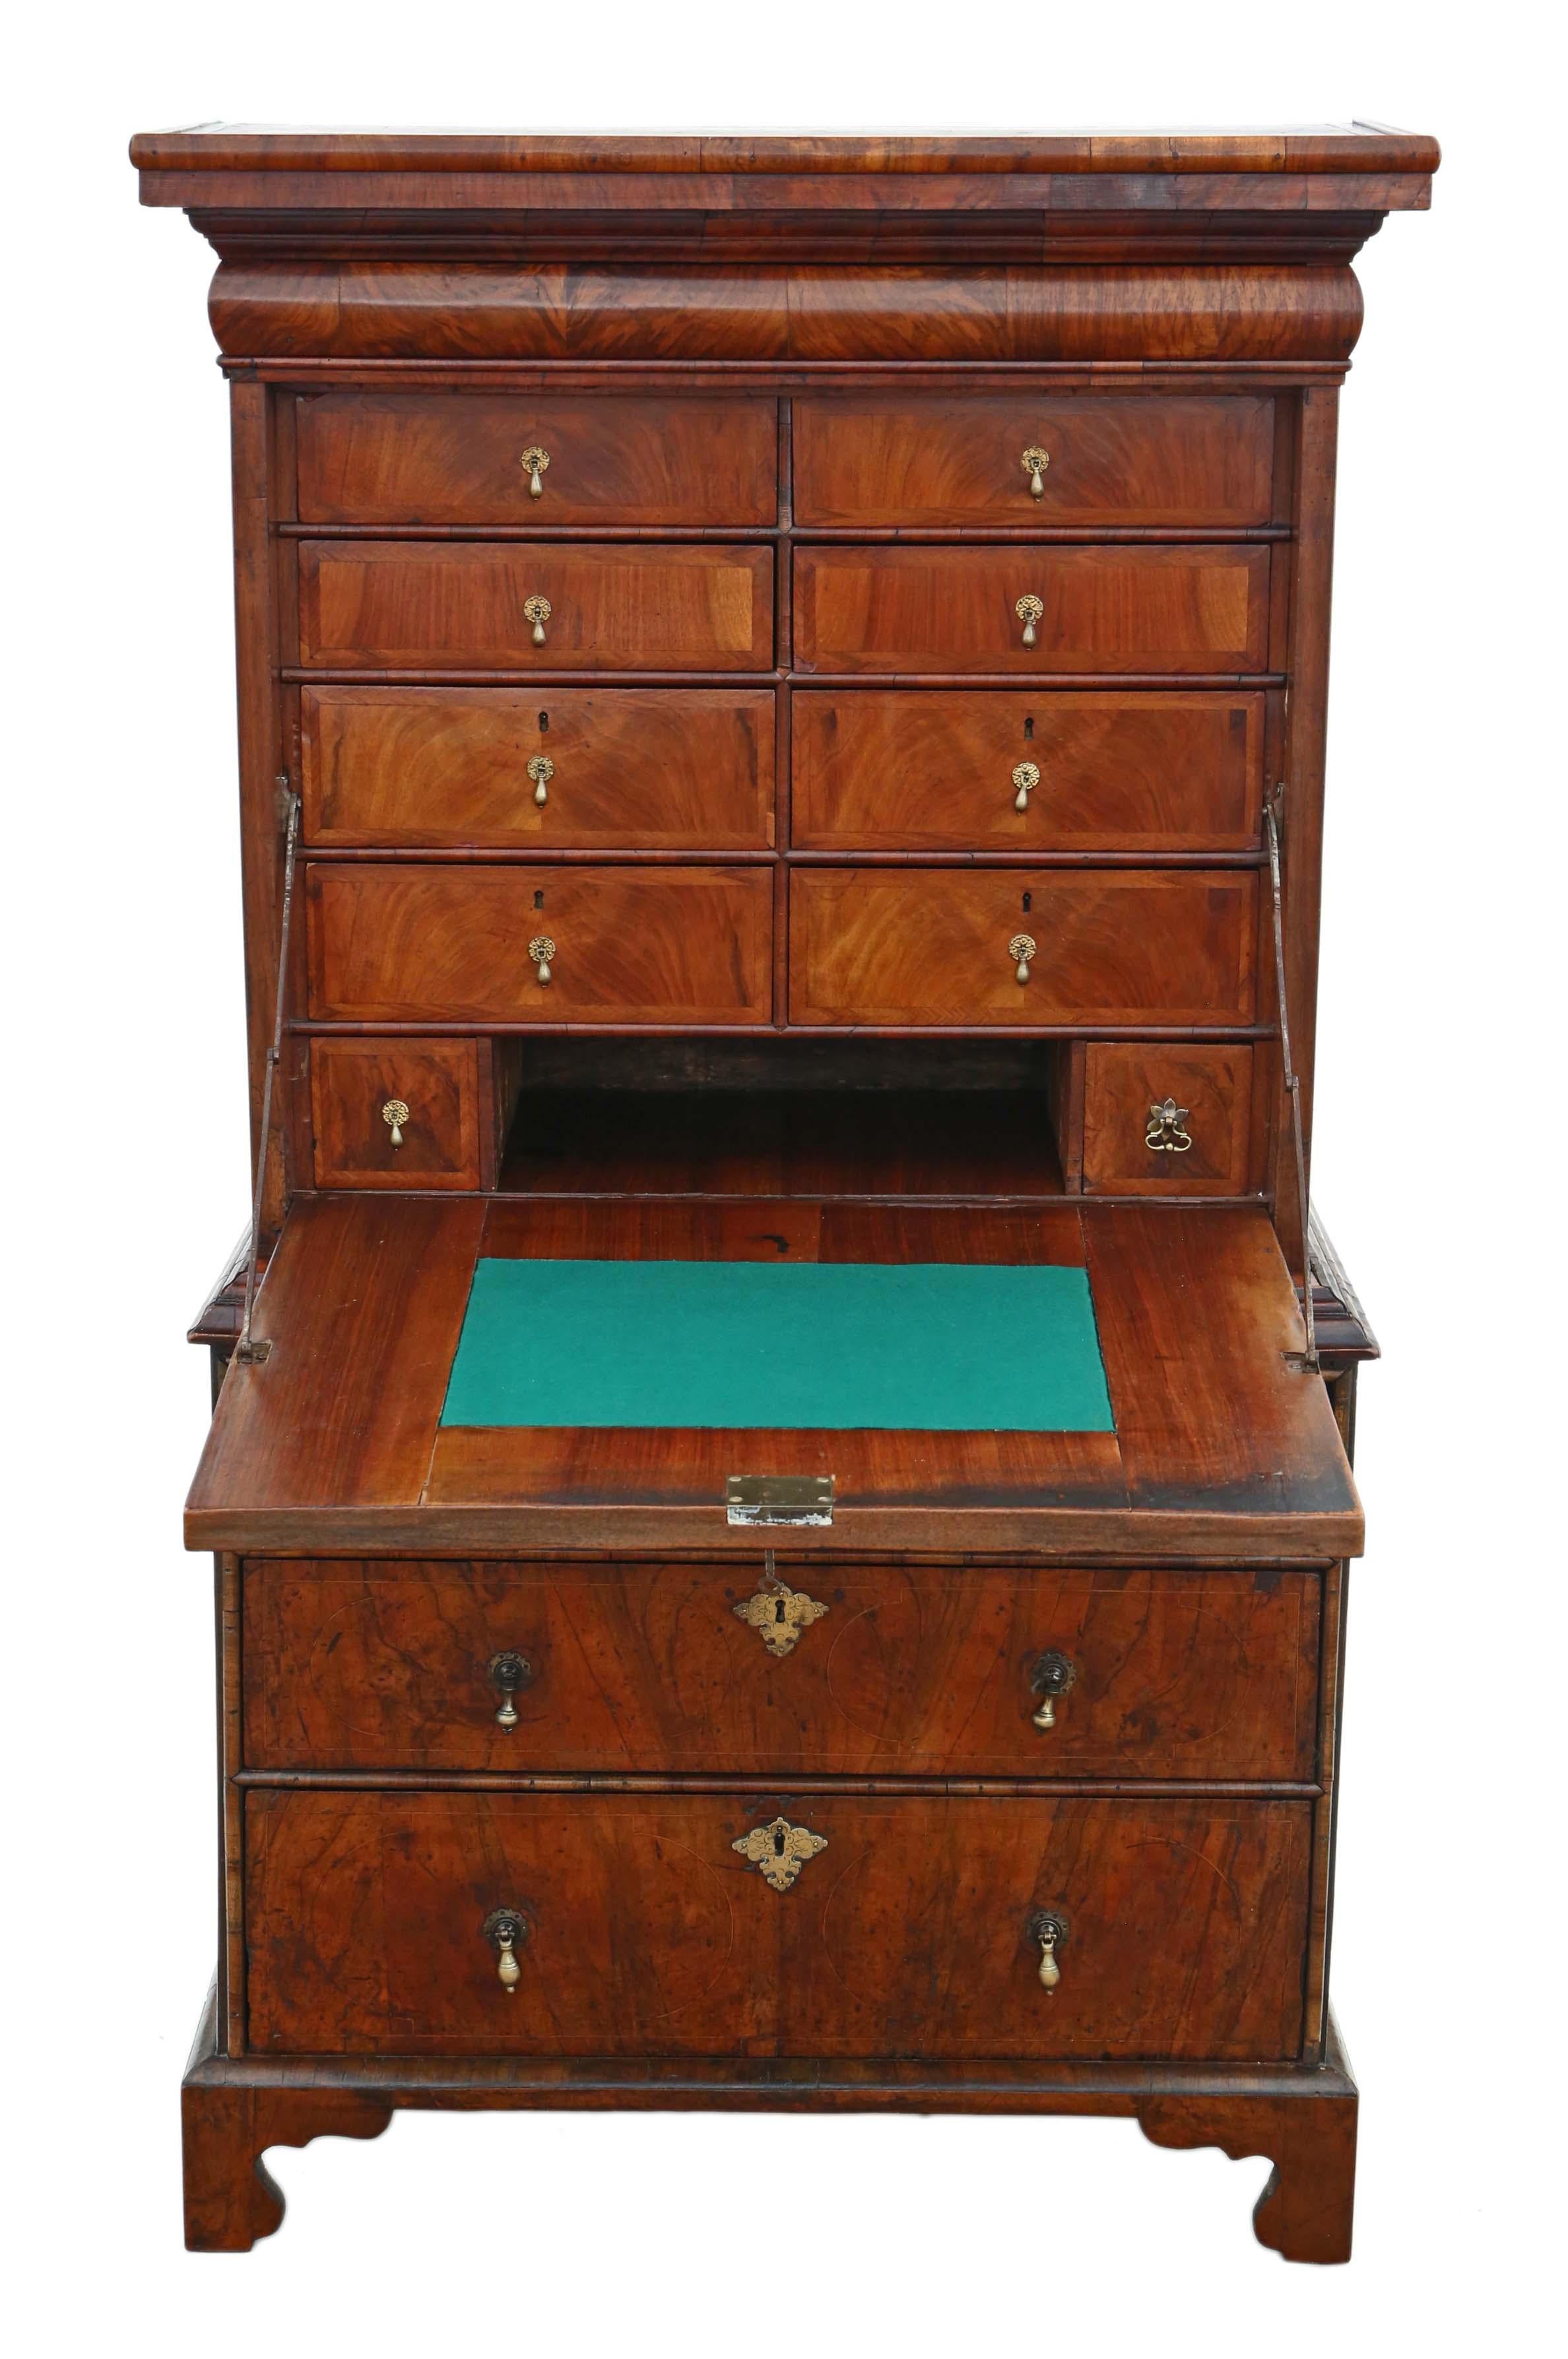 Antique fine quality Queen Anne early 18th Century inlaid burr walnut escritoire, desk or chest. A wonderfully honest quality period piece.

Solid and strong, with no loose joints. Full of age, character and charm. Key to fall front only.